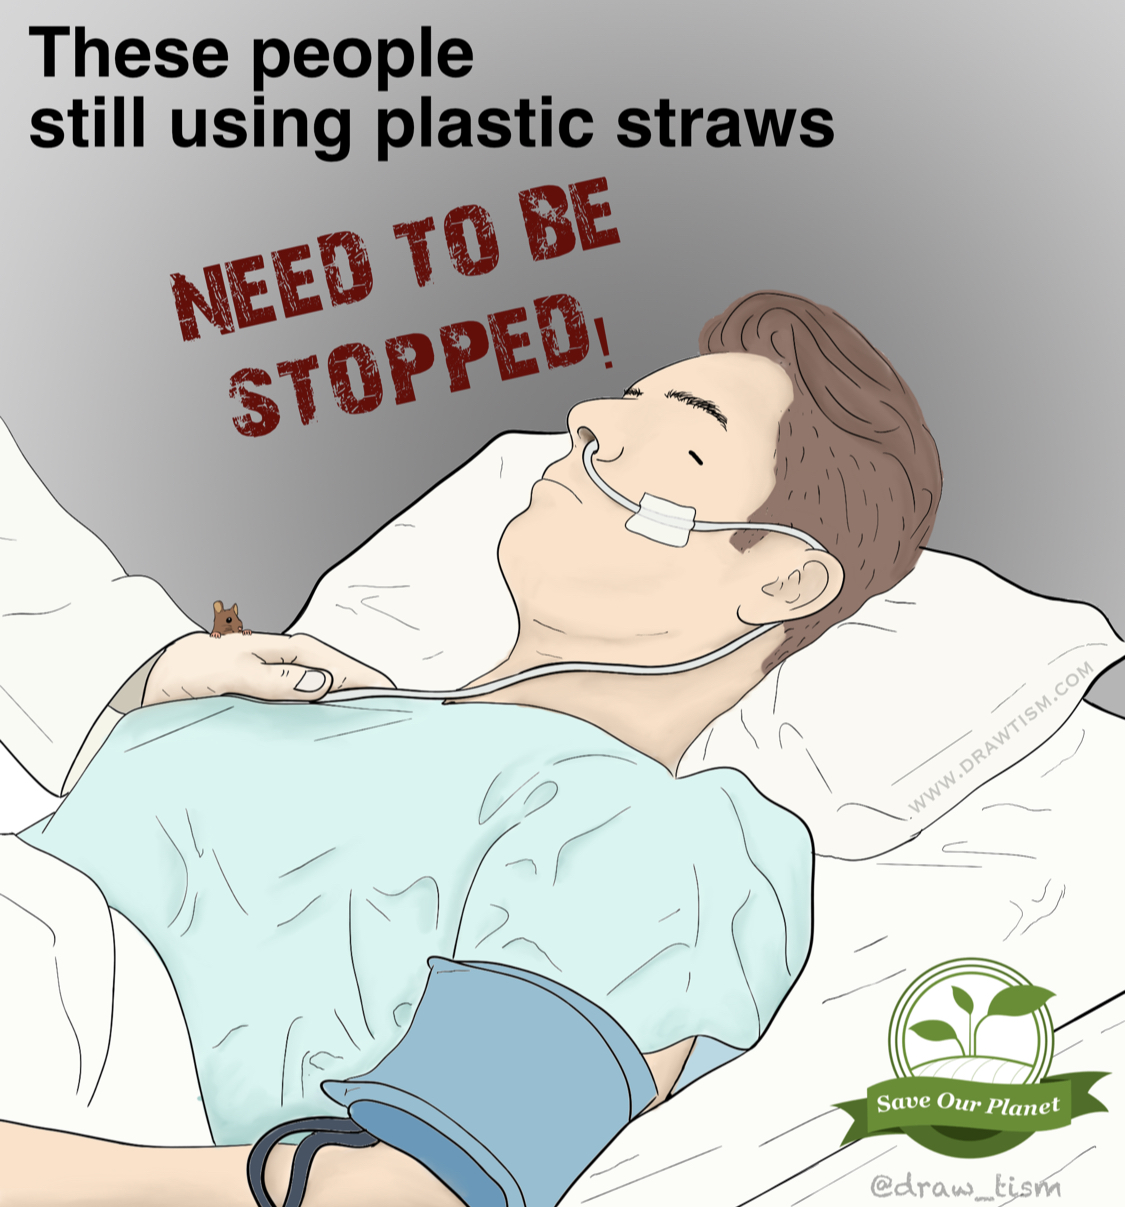 cctv in operation sign - These people still using plastic straws Need To Be Stopped Save Our Planet edraw_lism